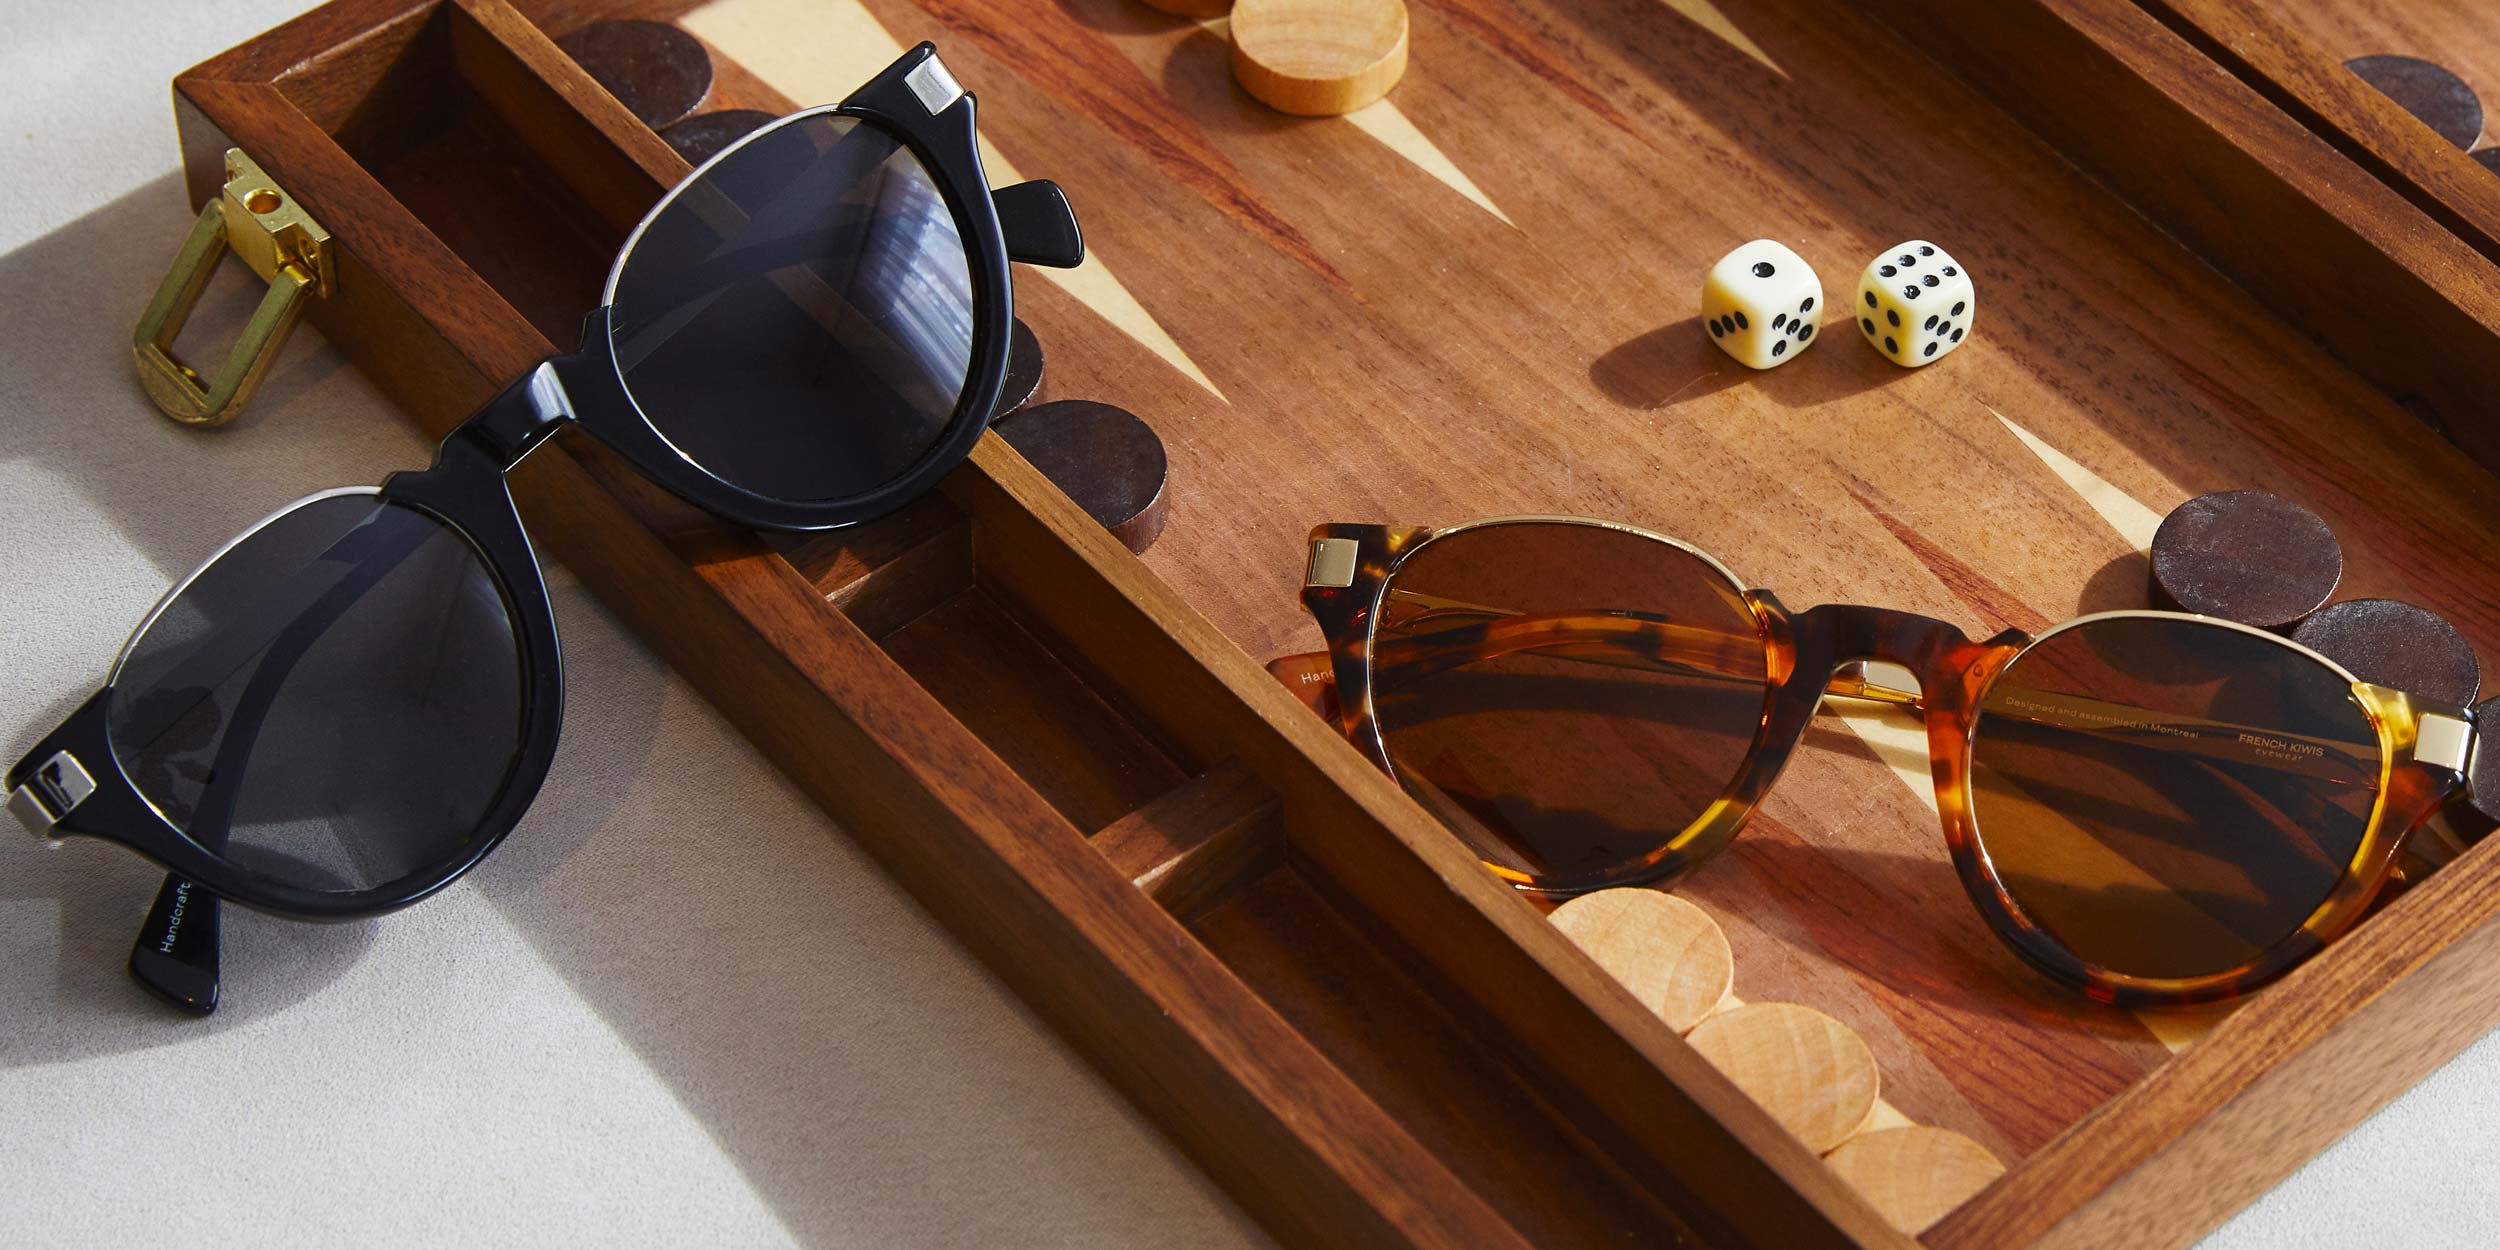 Photo Details of Charlie Tortoise & Gold Reading Glasses in a room